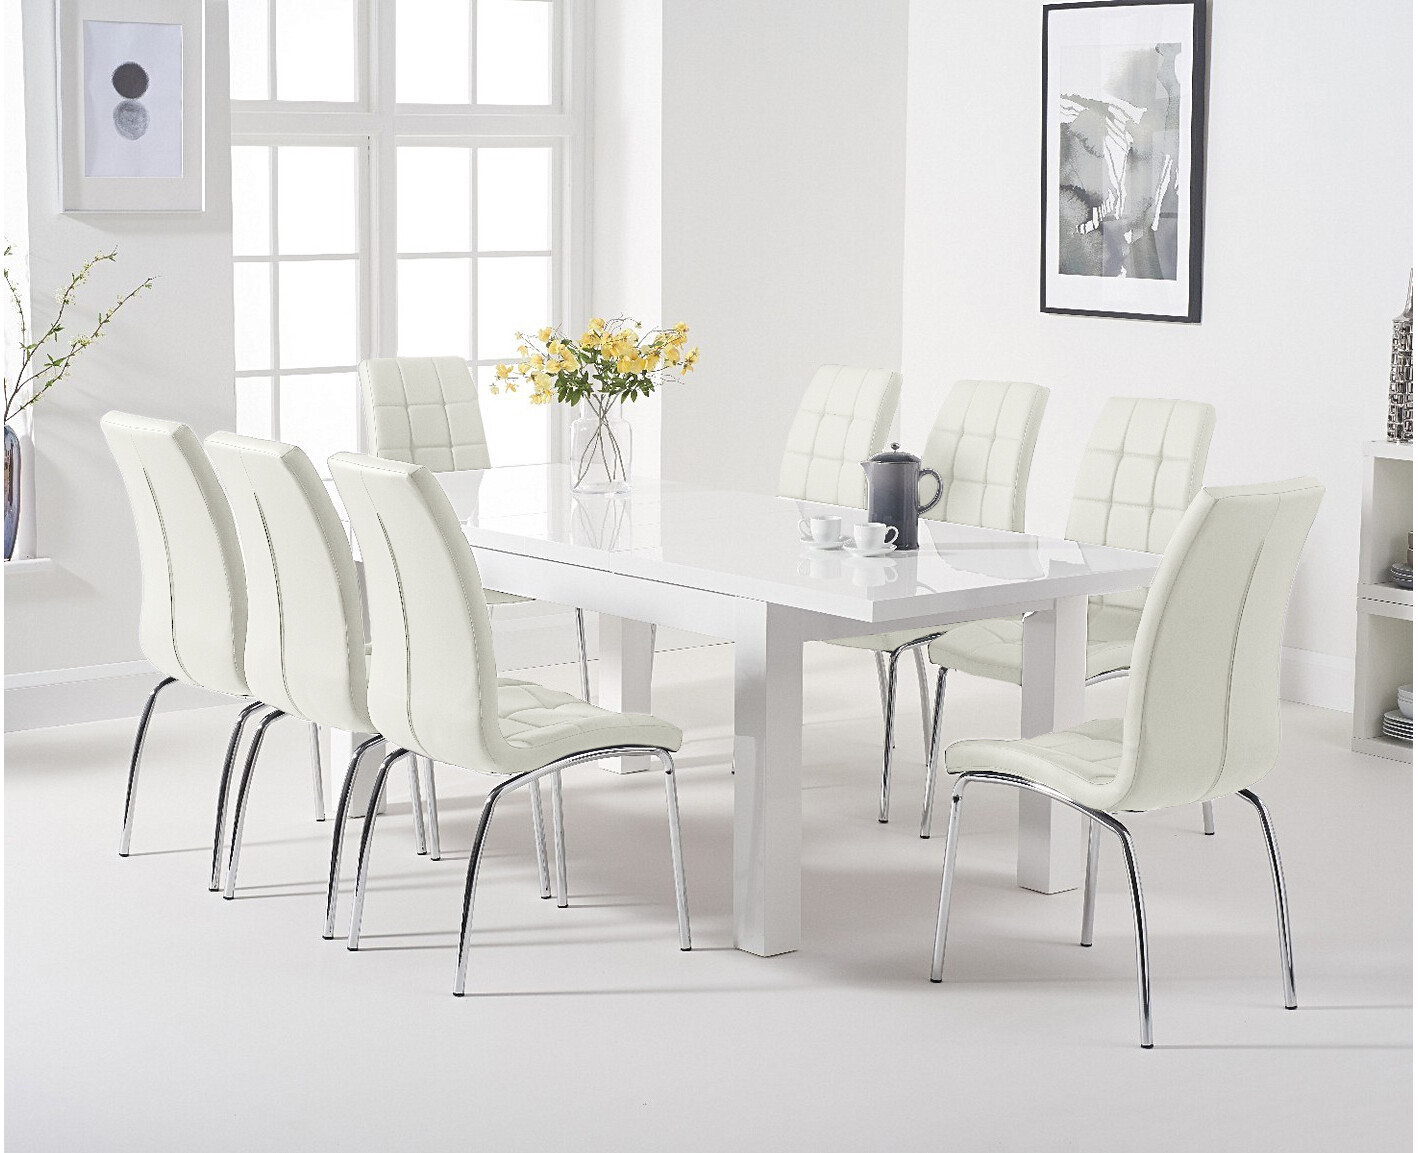 Extending Atlanta 160cm White High Gloss Dining Table With 8 Grey Enzo Chairs